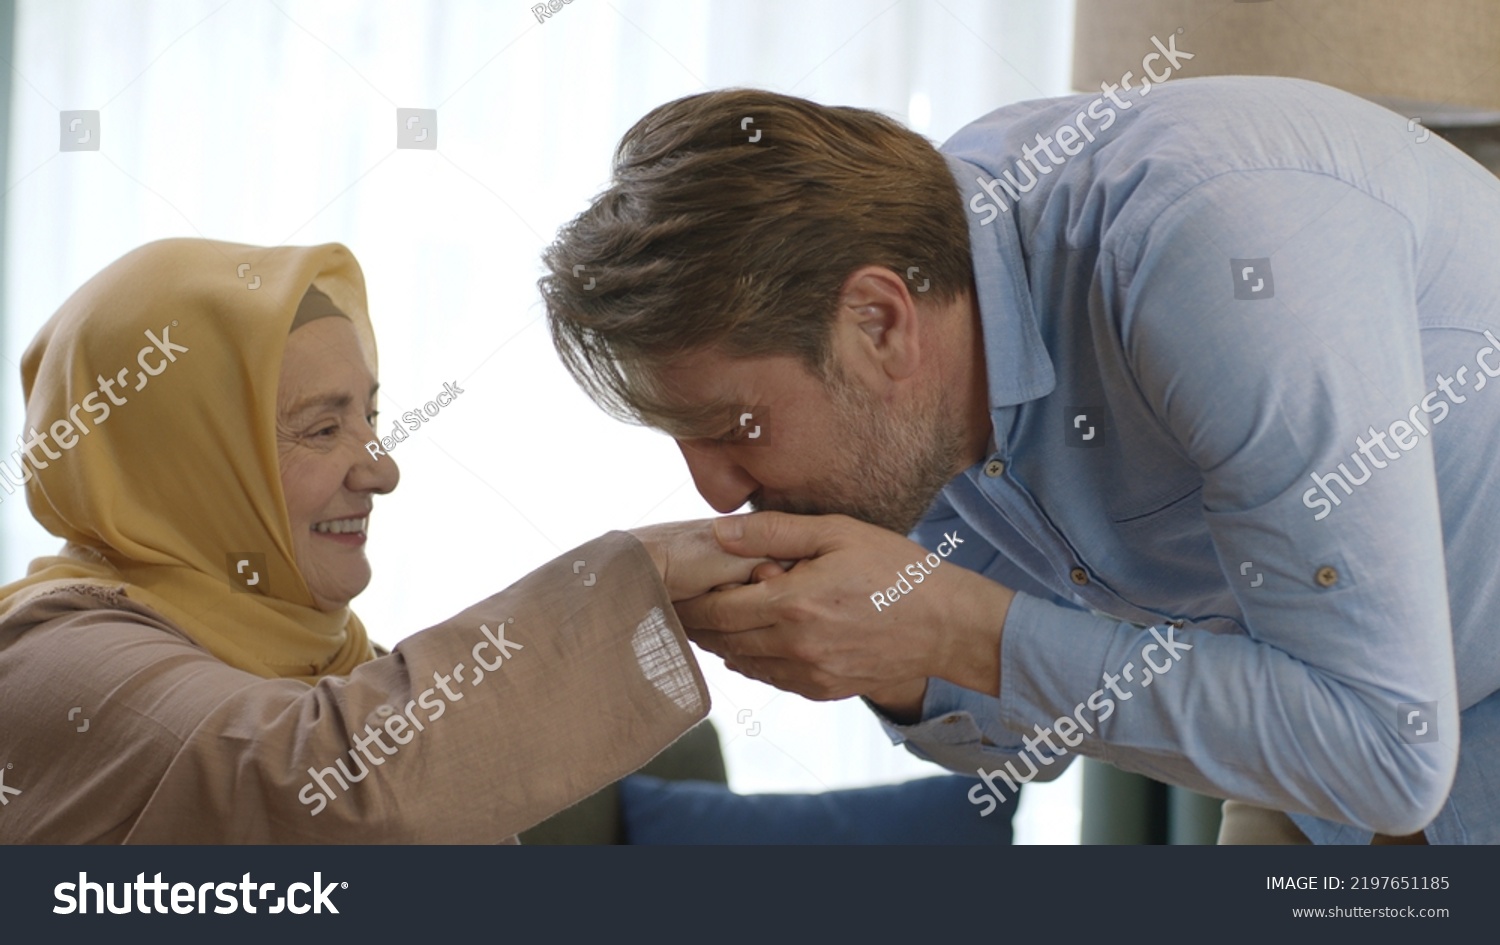 Young man kisses his mother's hand during Eid Mubarak (Turkish Ramadan or Şeker Bayram).The man kisses her hand to show respect to her veiled mother.Muslim holiday traditions concept. #2197651185